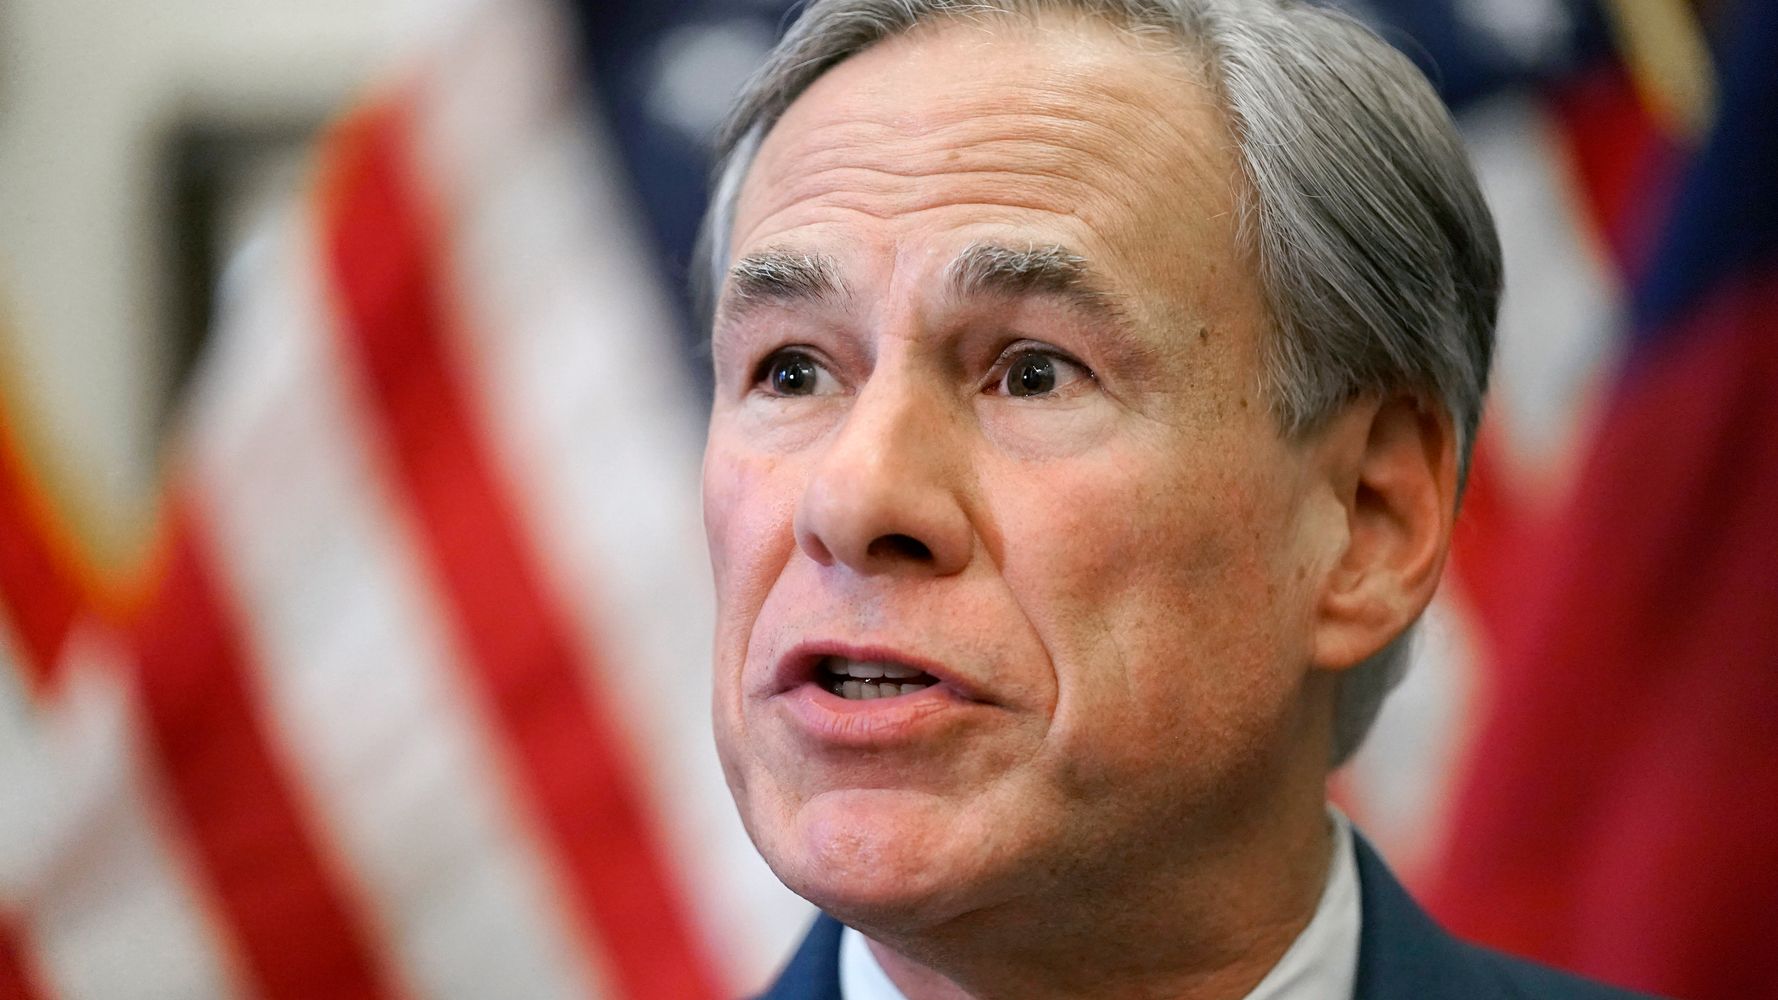 The Texas governor is asking for federal help with covid testing, treatments as cases increase